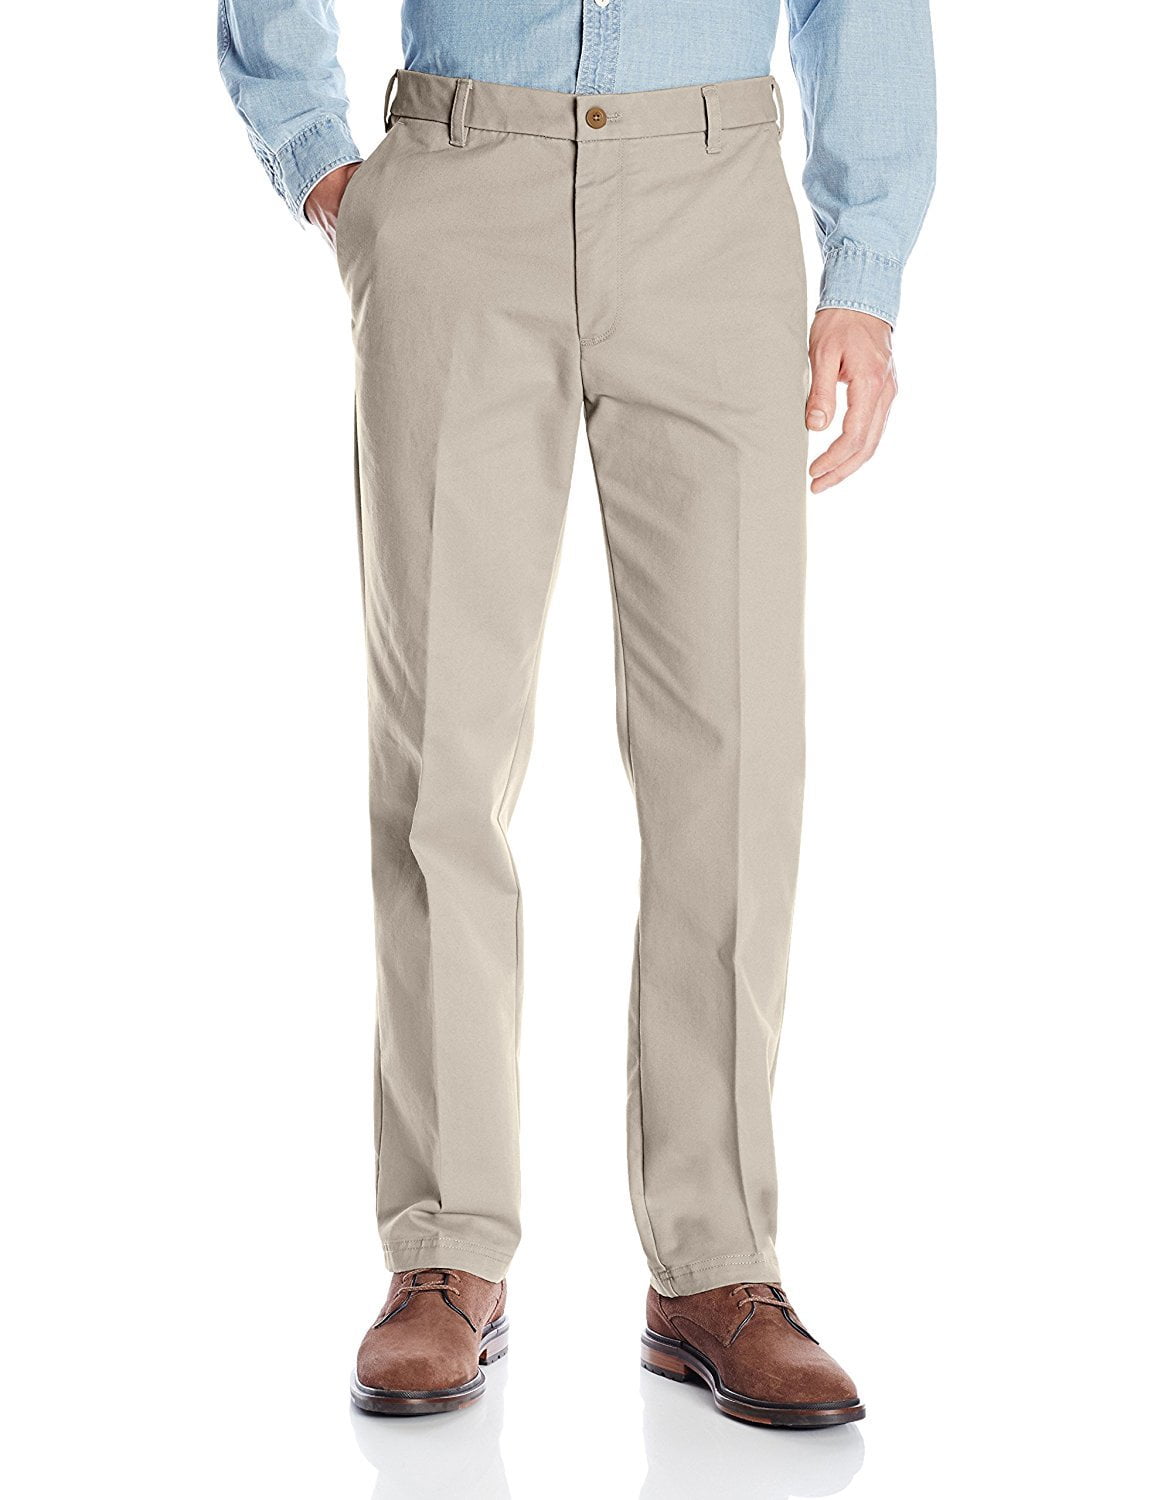 IZOD Men's Performance Stretch Straight Fit Flat Front Chino Pant, Warn ...